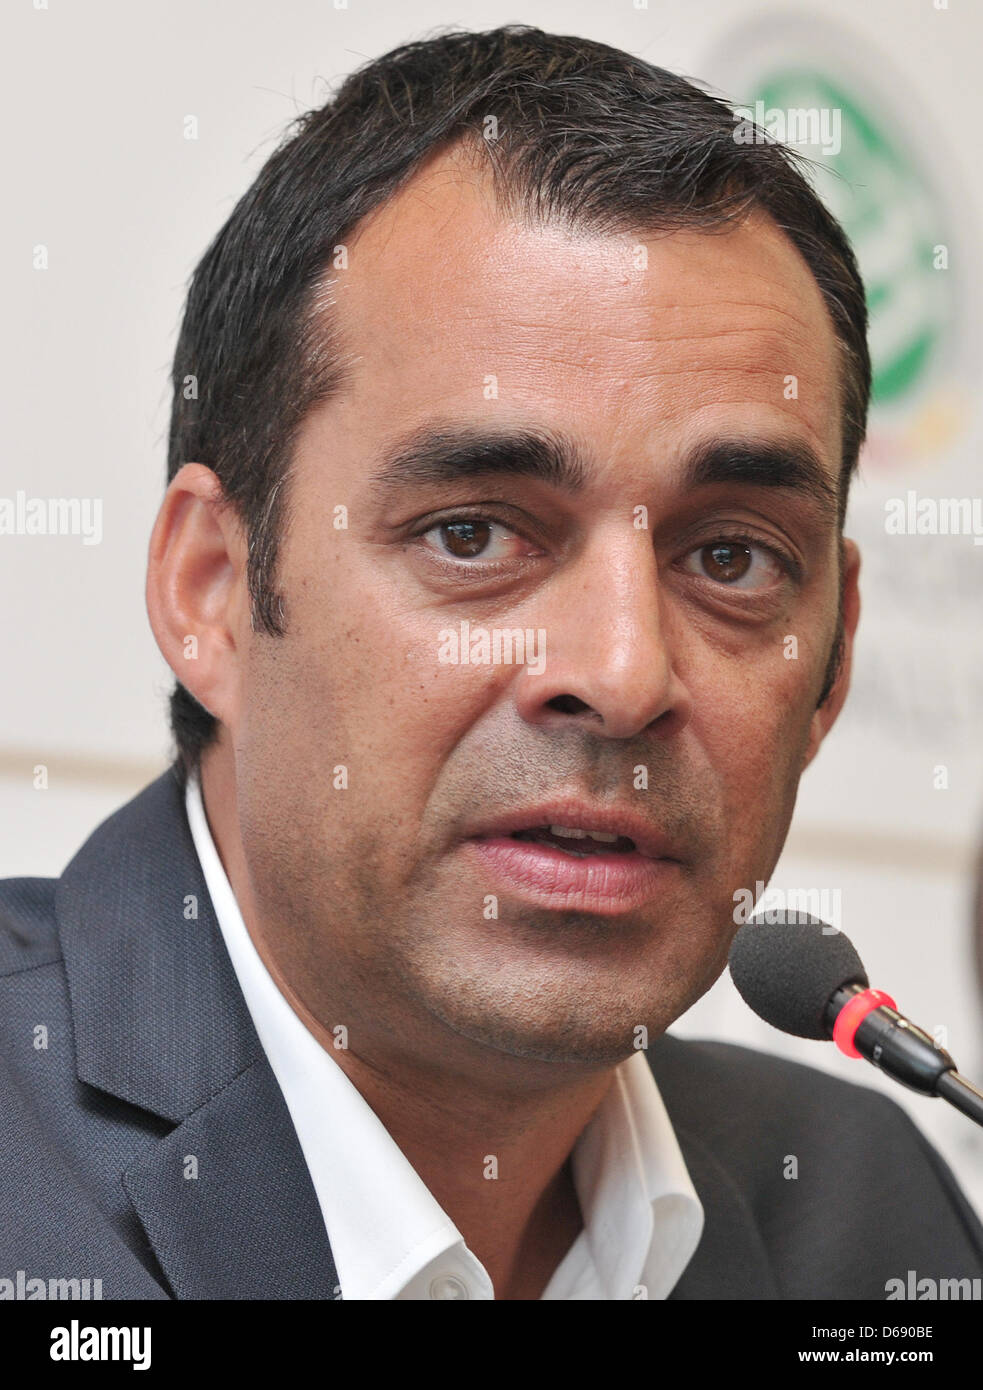 New sporting director of the German Football Association (DFB) Robin Dutt attends a press conference in Frankfurt Main, Germany, 25 July 2012. The appointment of the 47 year old is considered to be somewhat of a surprise. Dutt will start his new job on 01 August 2012 with a contract until 2016. Photo: FRANK KLEEFELDT Stock Photo